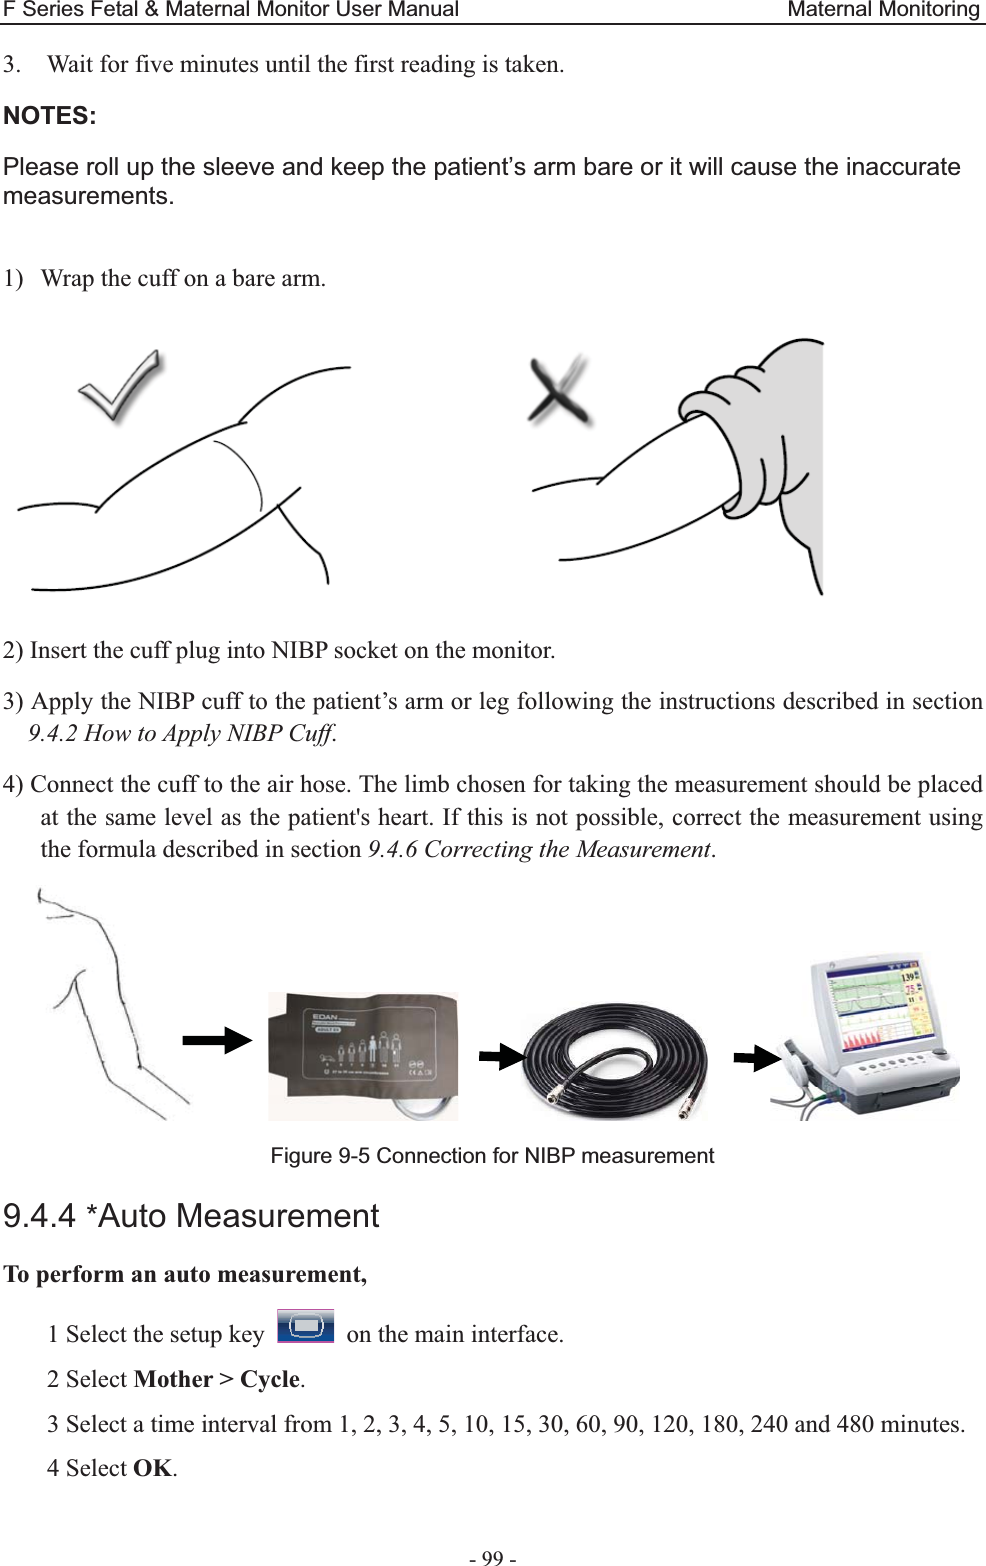 F Series Fetal &amp; Maternal Monitor User Manual                              Maternal Monitoring - 99 - 3. Wait for five minutes until the first reading is taken. NOTES: Please roll up the sleeve and keep the patient’s arm bare or it will cause the inaccurate measurements.  1) Wrap the cuff on a bare arm.    2) Insert the cuff plug into NIBP socket on the monitor. 3) Apply the NIBP cuff to the patient’s arm or leg following the instructions described in section 9.4.2 How to Apply NIBP Cuff. 4) Connect the cuff to the air hose. The limb chosen for taking the measurement should be placed at the same level as the patient&apos;s heart. If this is not possible, correct the measurement using the formula described in section 9.4.6 Correcting the Measurement.                     Figure 9-5 Connection for NIBP measurement 9.4.4 *Auto Measurement To perform an auto measurement, 1 Select the setup key    on the main interface. 2 Select Mother &gt; Cycle. 3 Select a time interval from 1, 2, 3, 4, 5, 10, 15, 30, 60, 90, 120, 180, 240 and 480 minutes. 4 Select OK. 